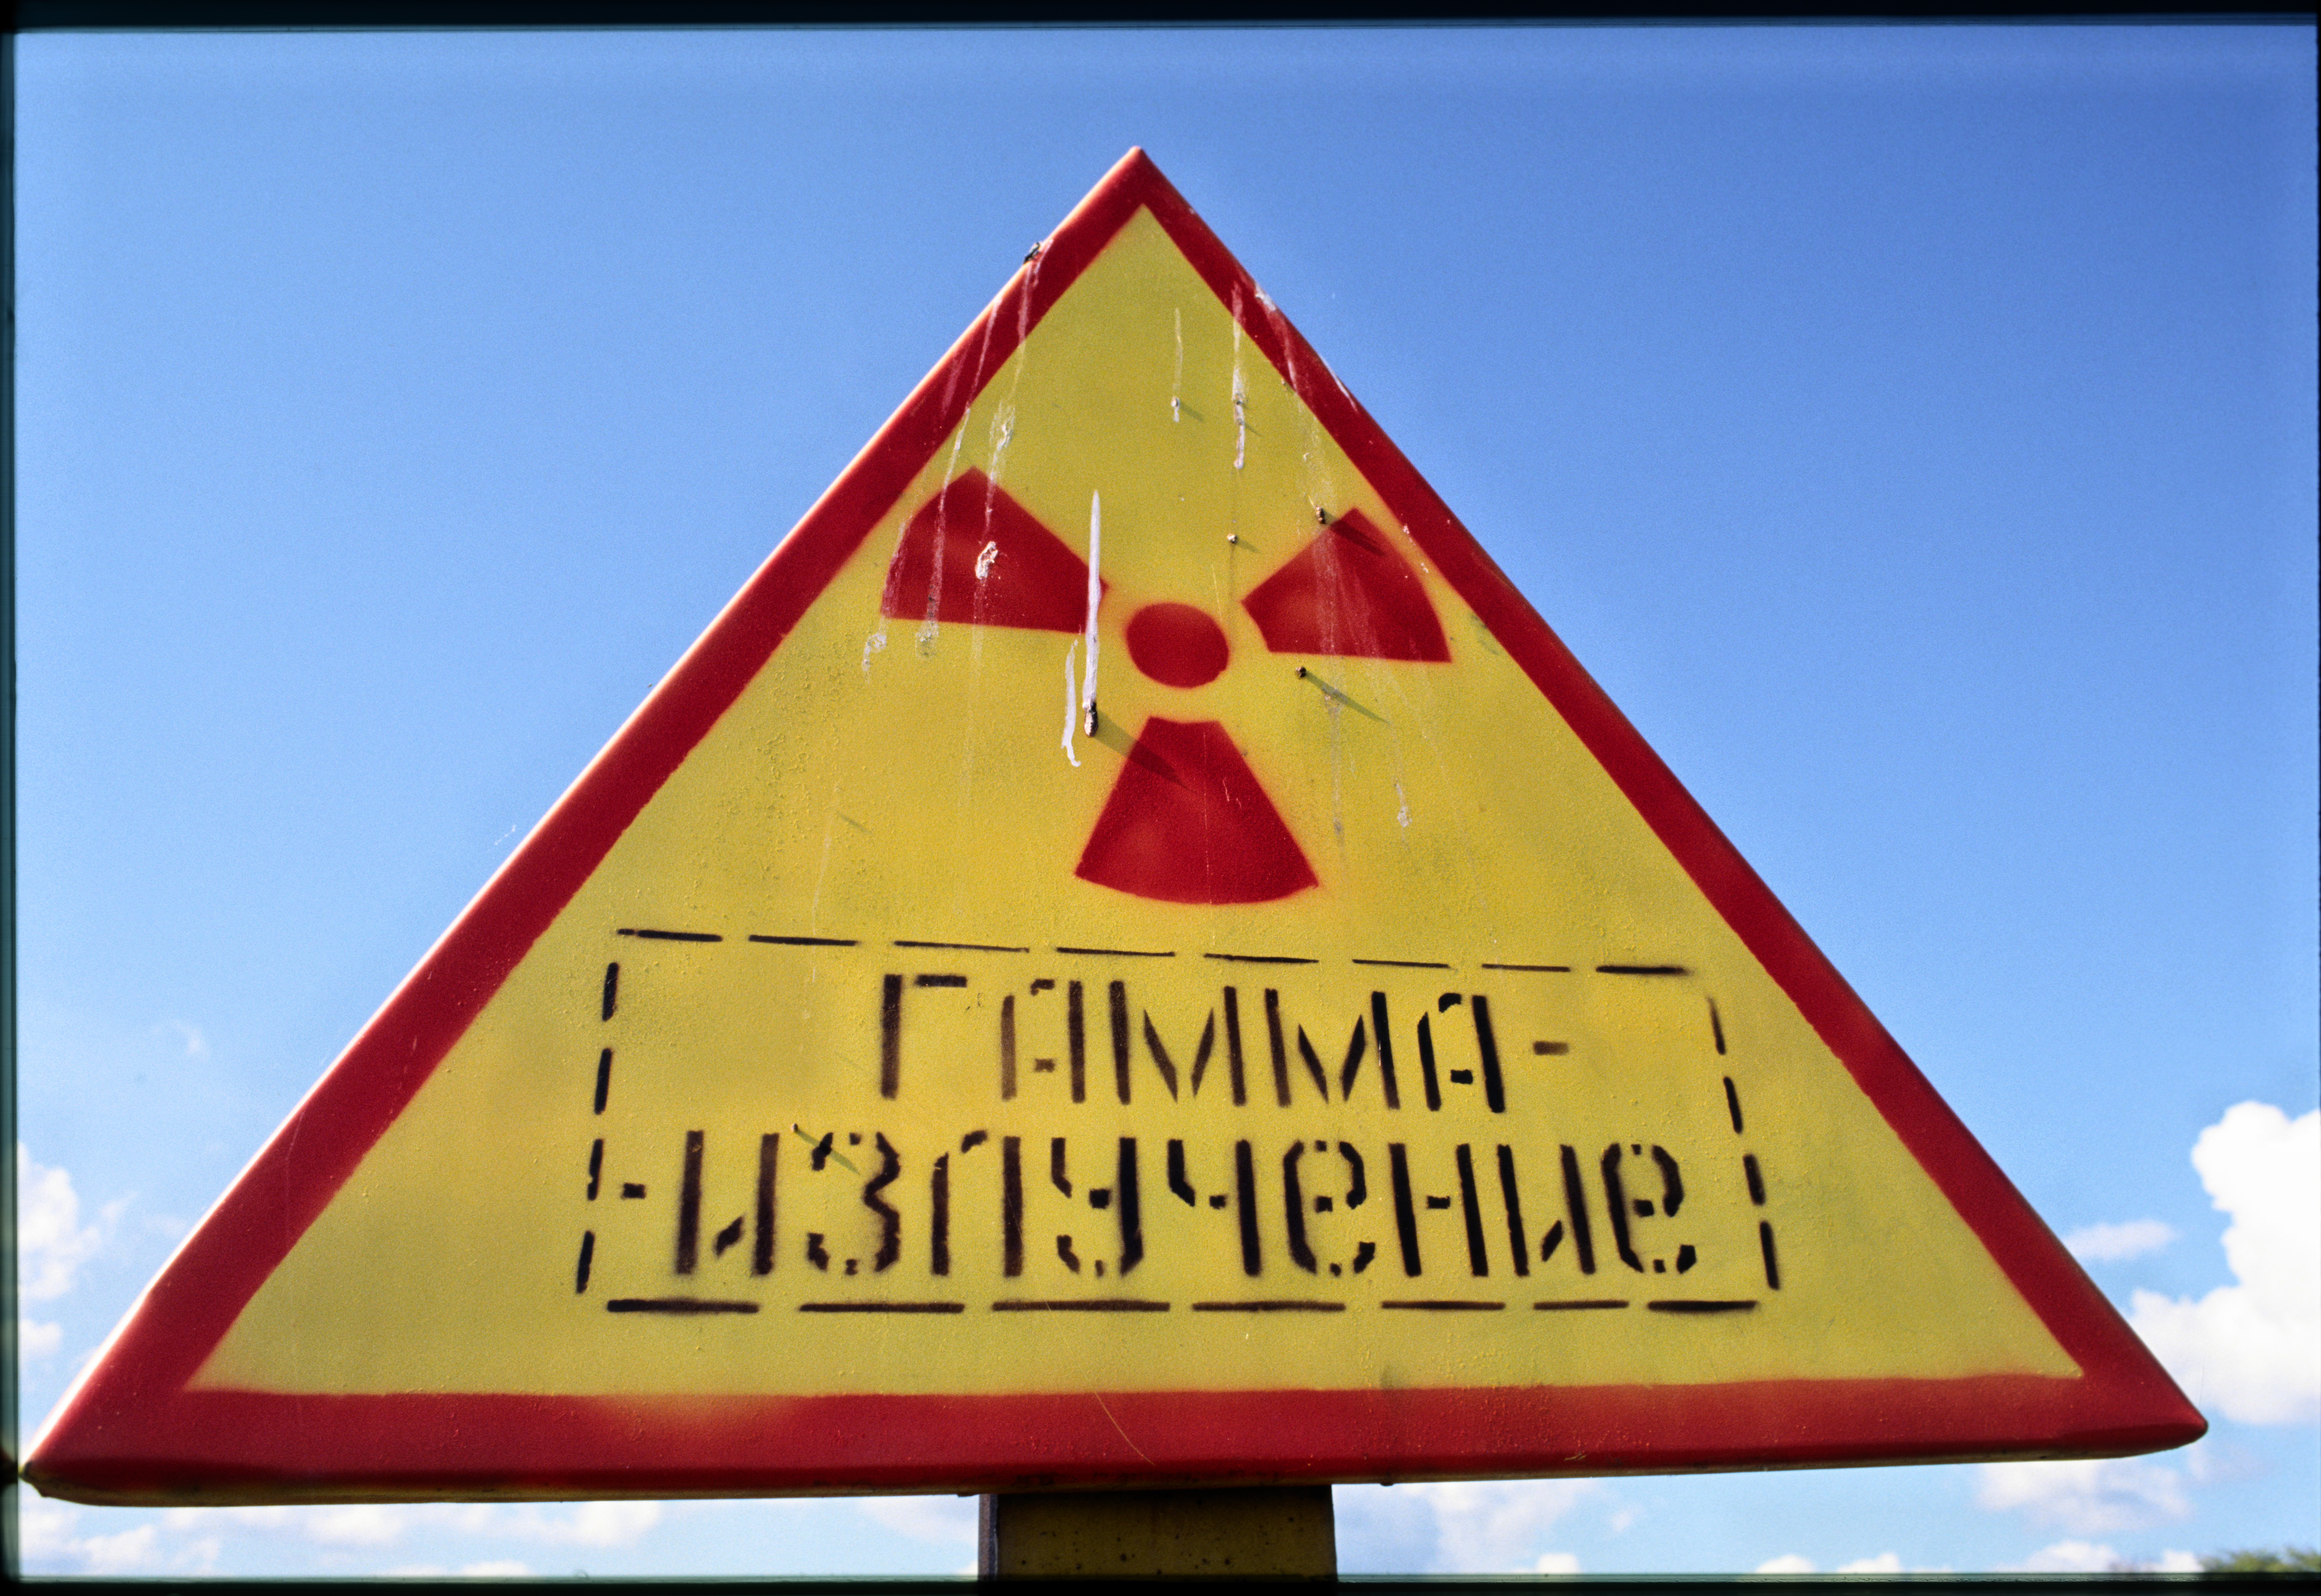 russia-s-mini-nuclear-reactors-plan-causes-concern-the-independent